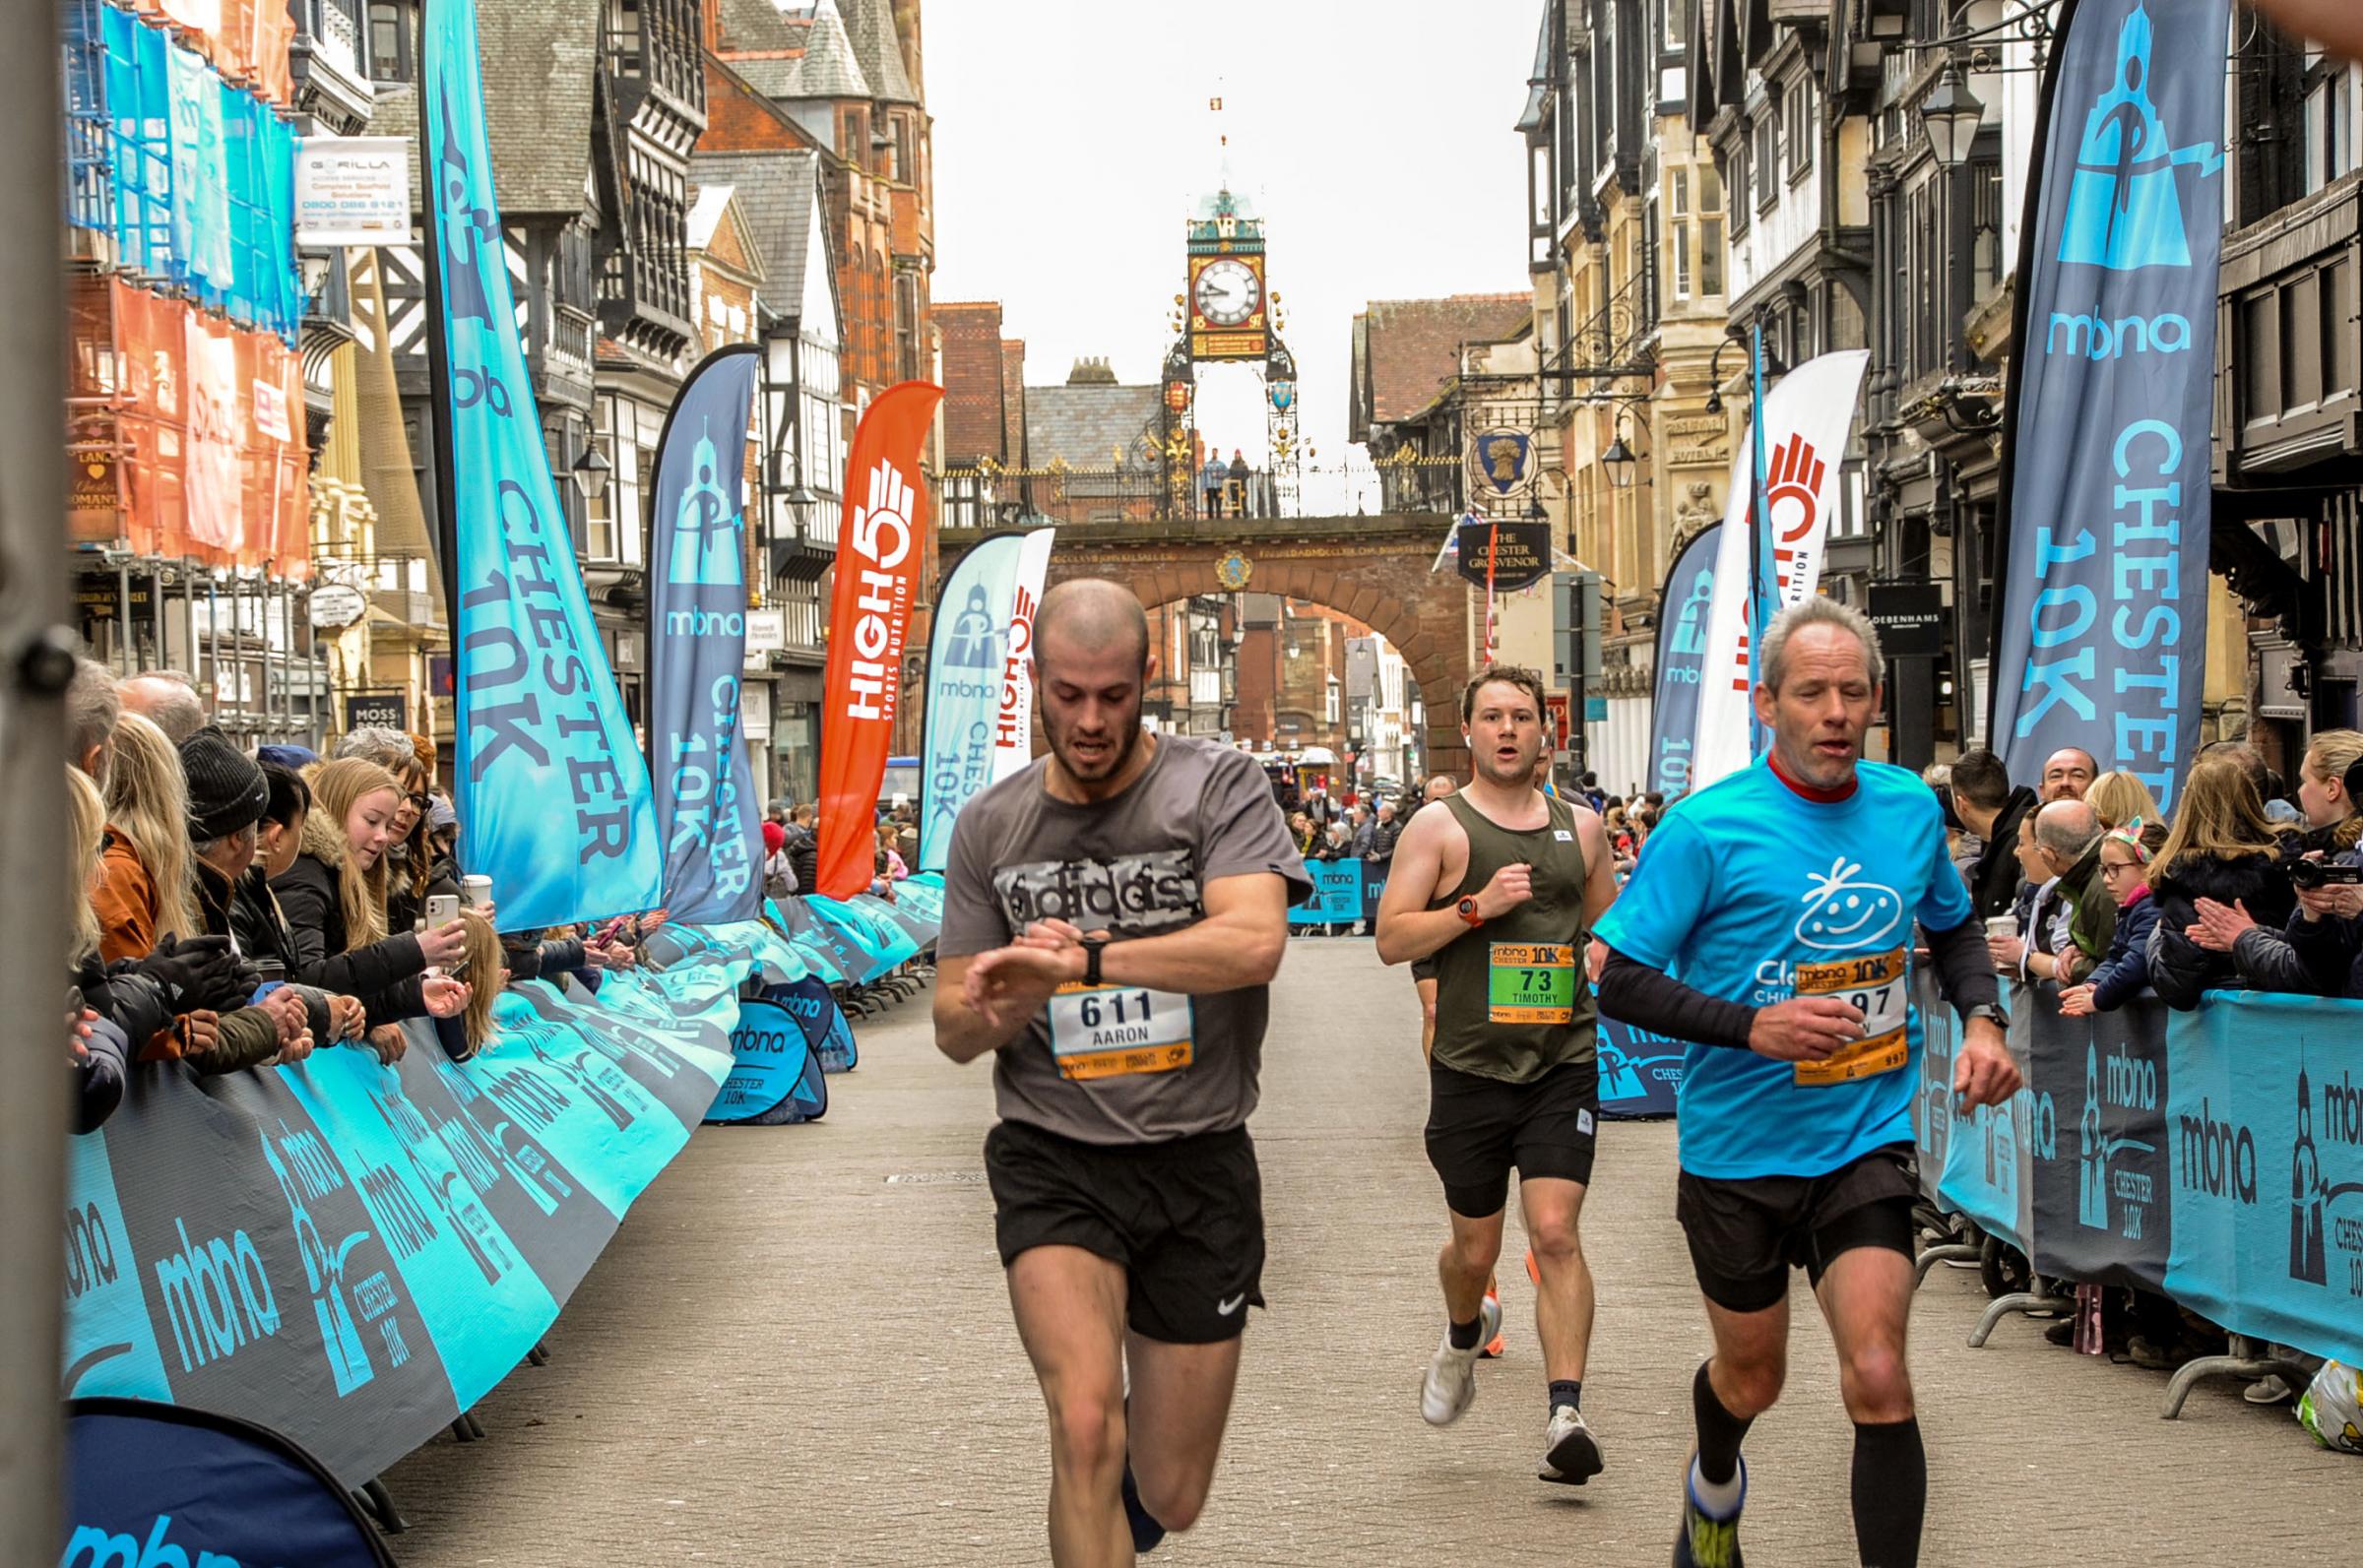 MBNA Chester 10K Race, Picture Runners crossing the finish line. SW13032022.